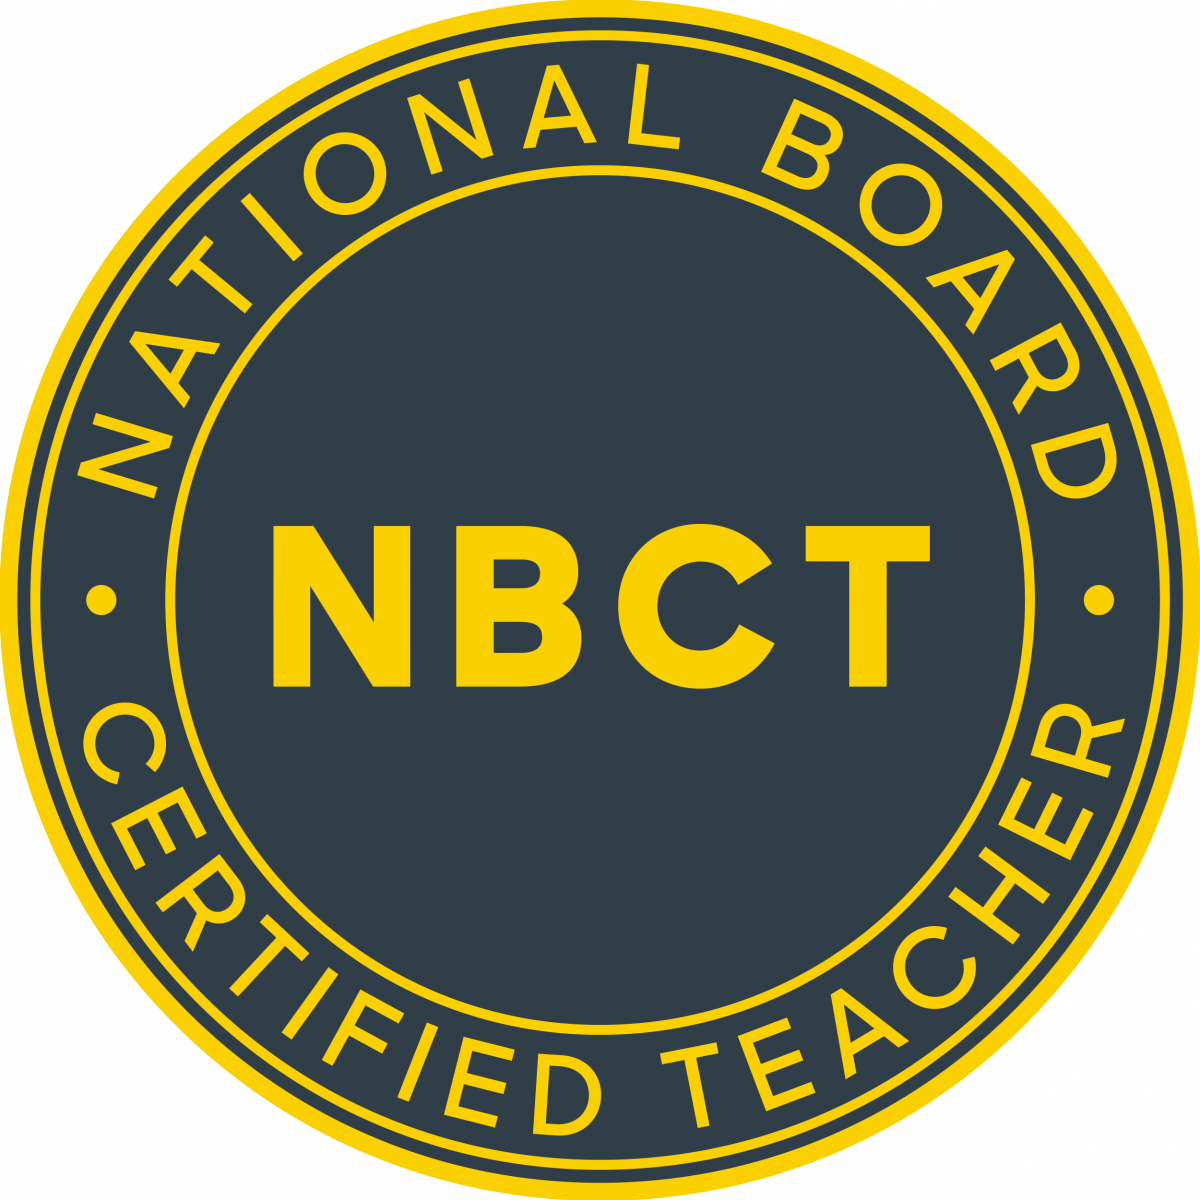 NBPTS Main Site The National Board for Professional Teaching Standards